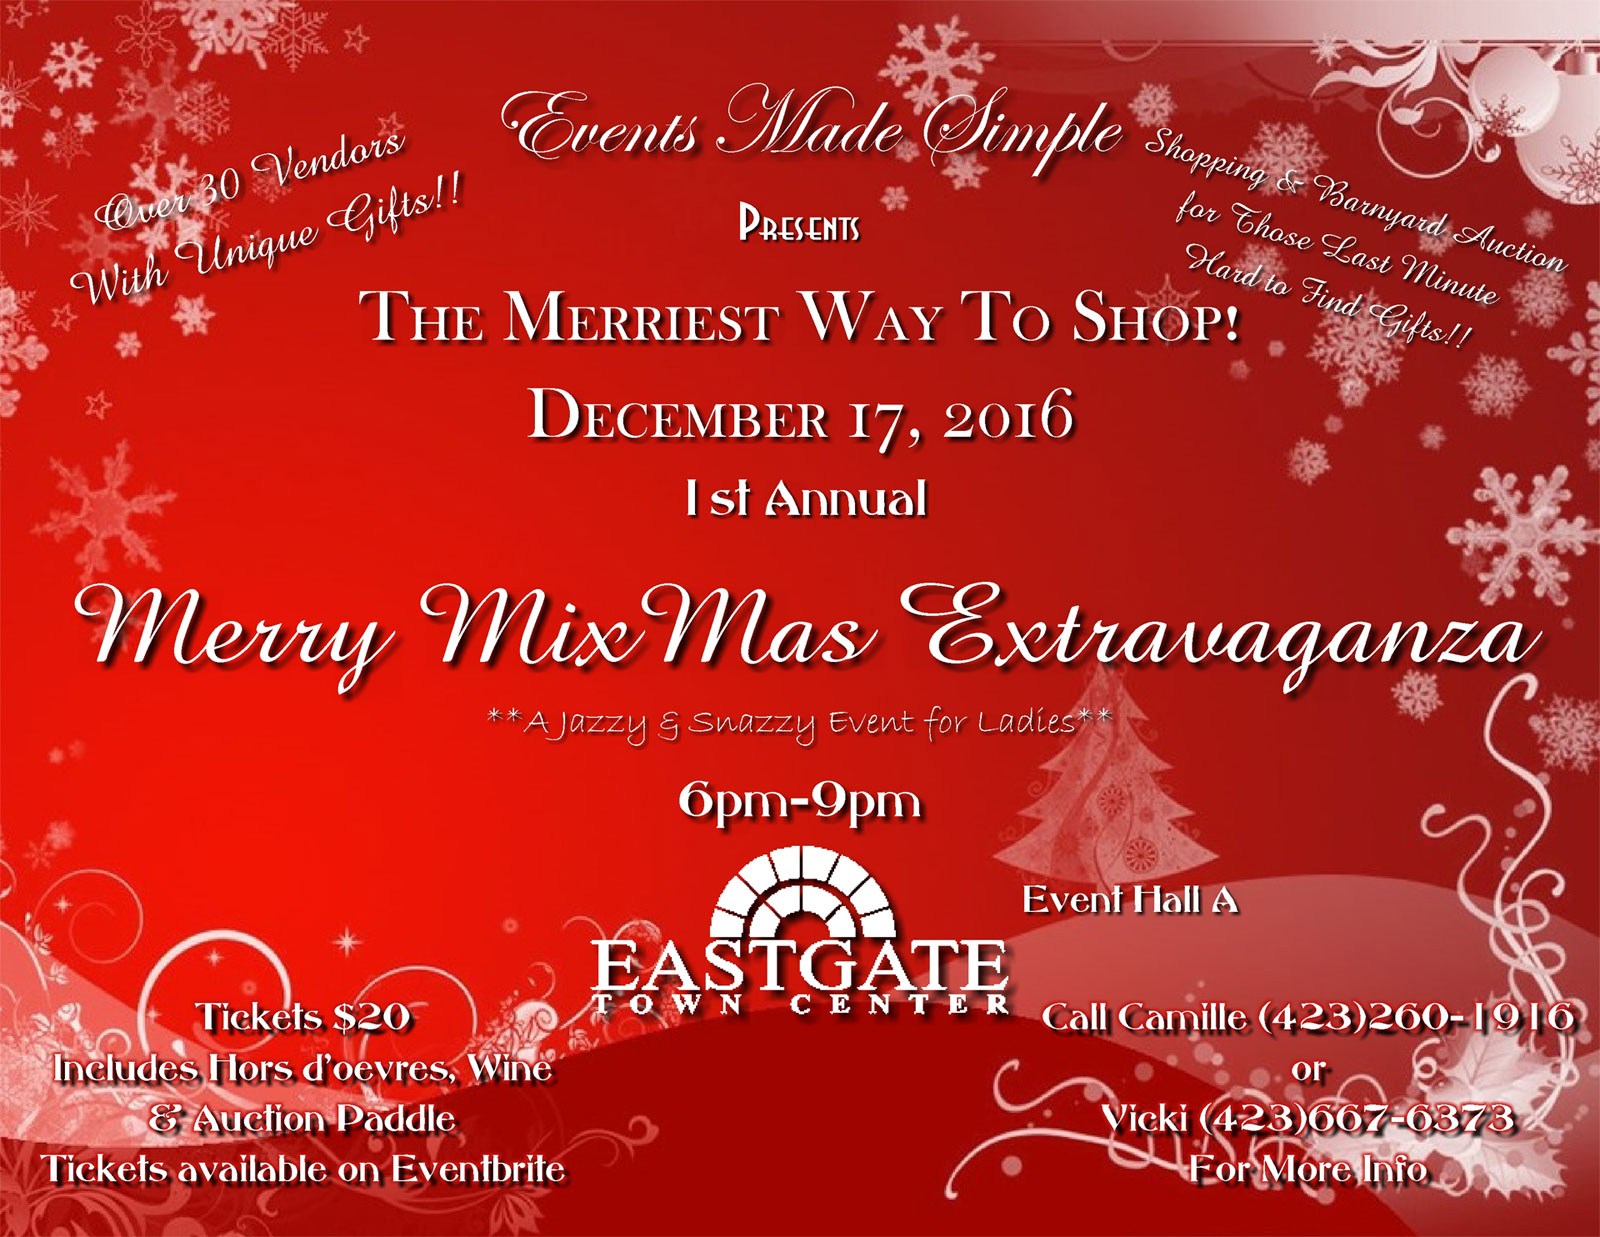 Eastgate Town Center Merry Mix Mas Extravaganza Event 2016